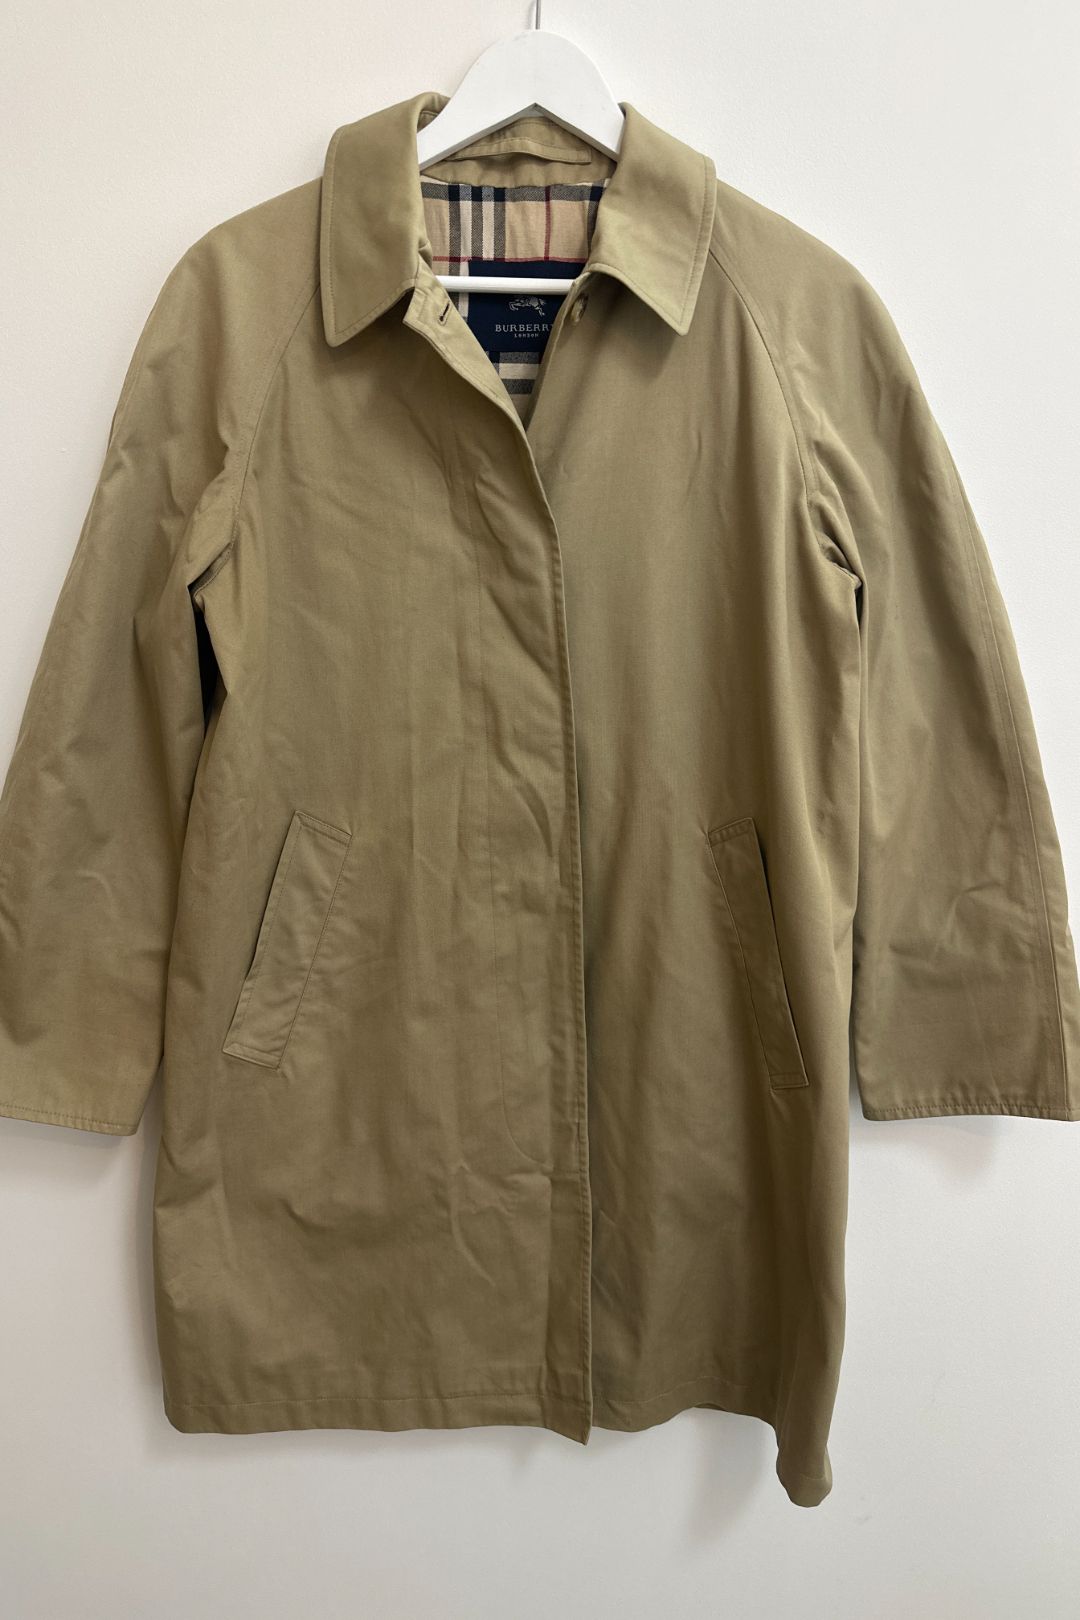 Burberry Beige Single Breasted Trench Coat